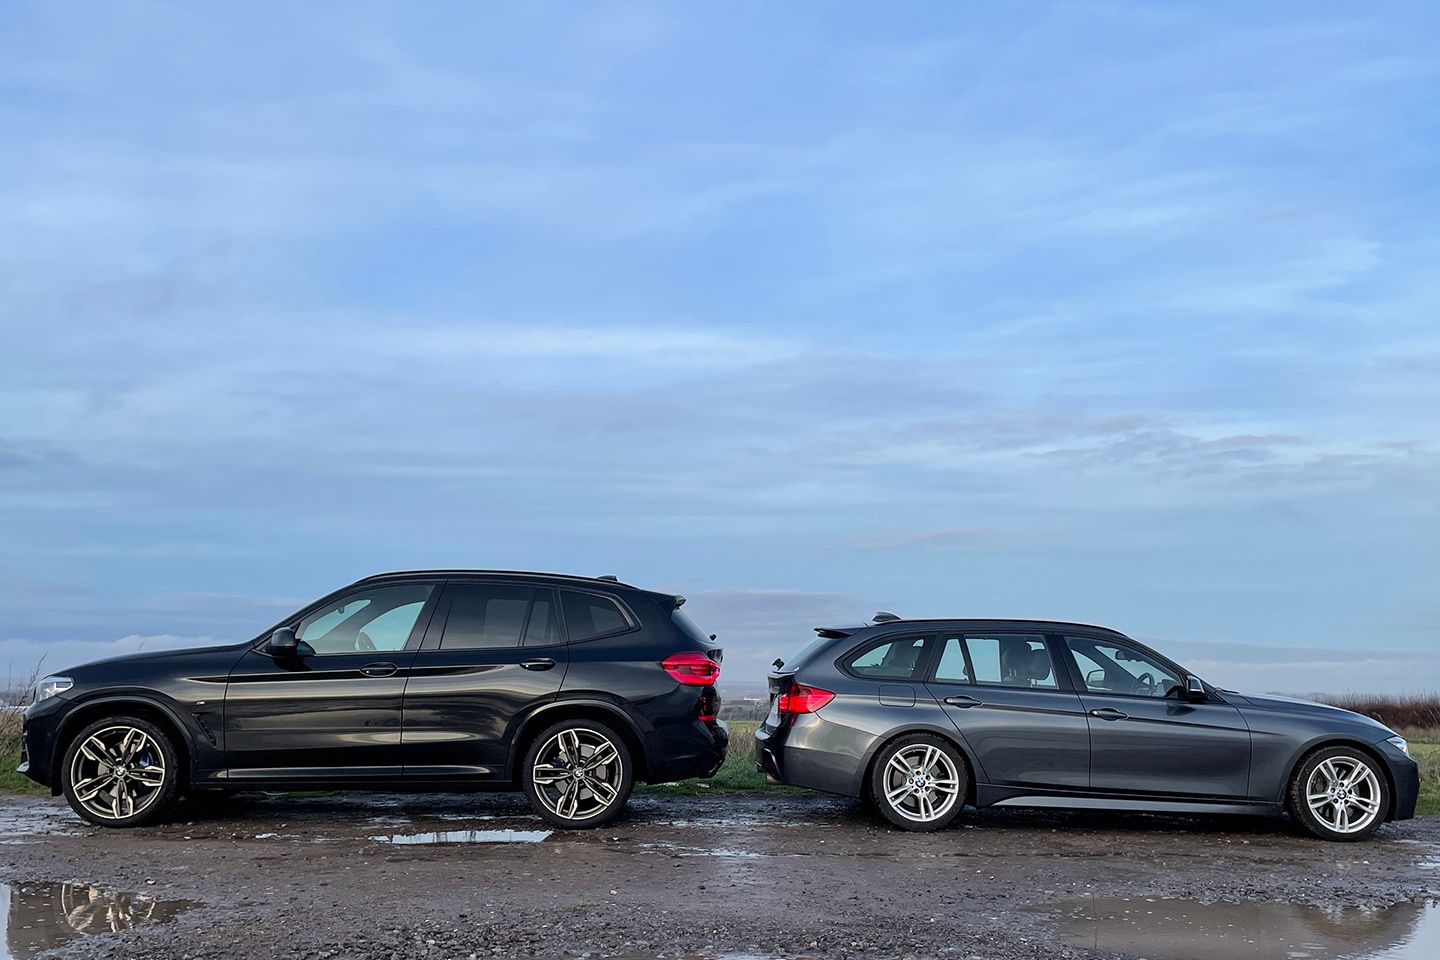 BMW 335i Touring (and an X3 M40i)